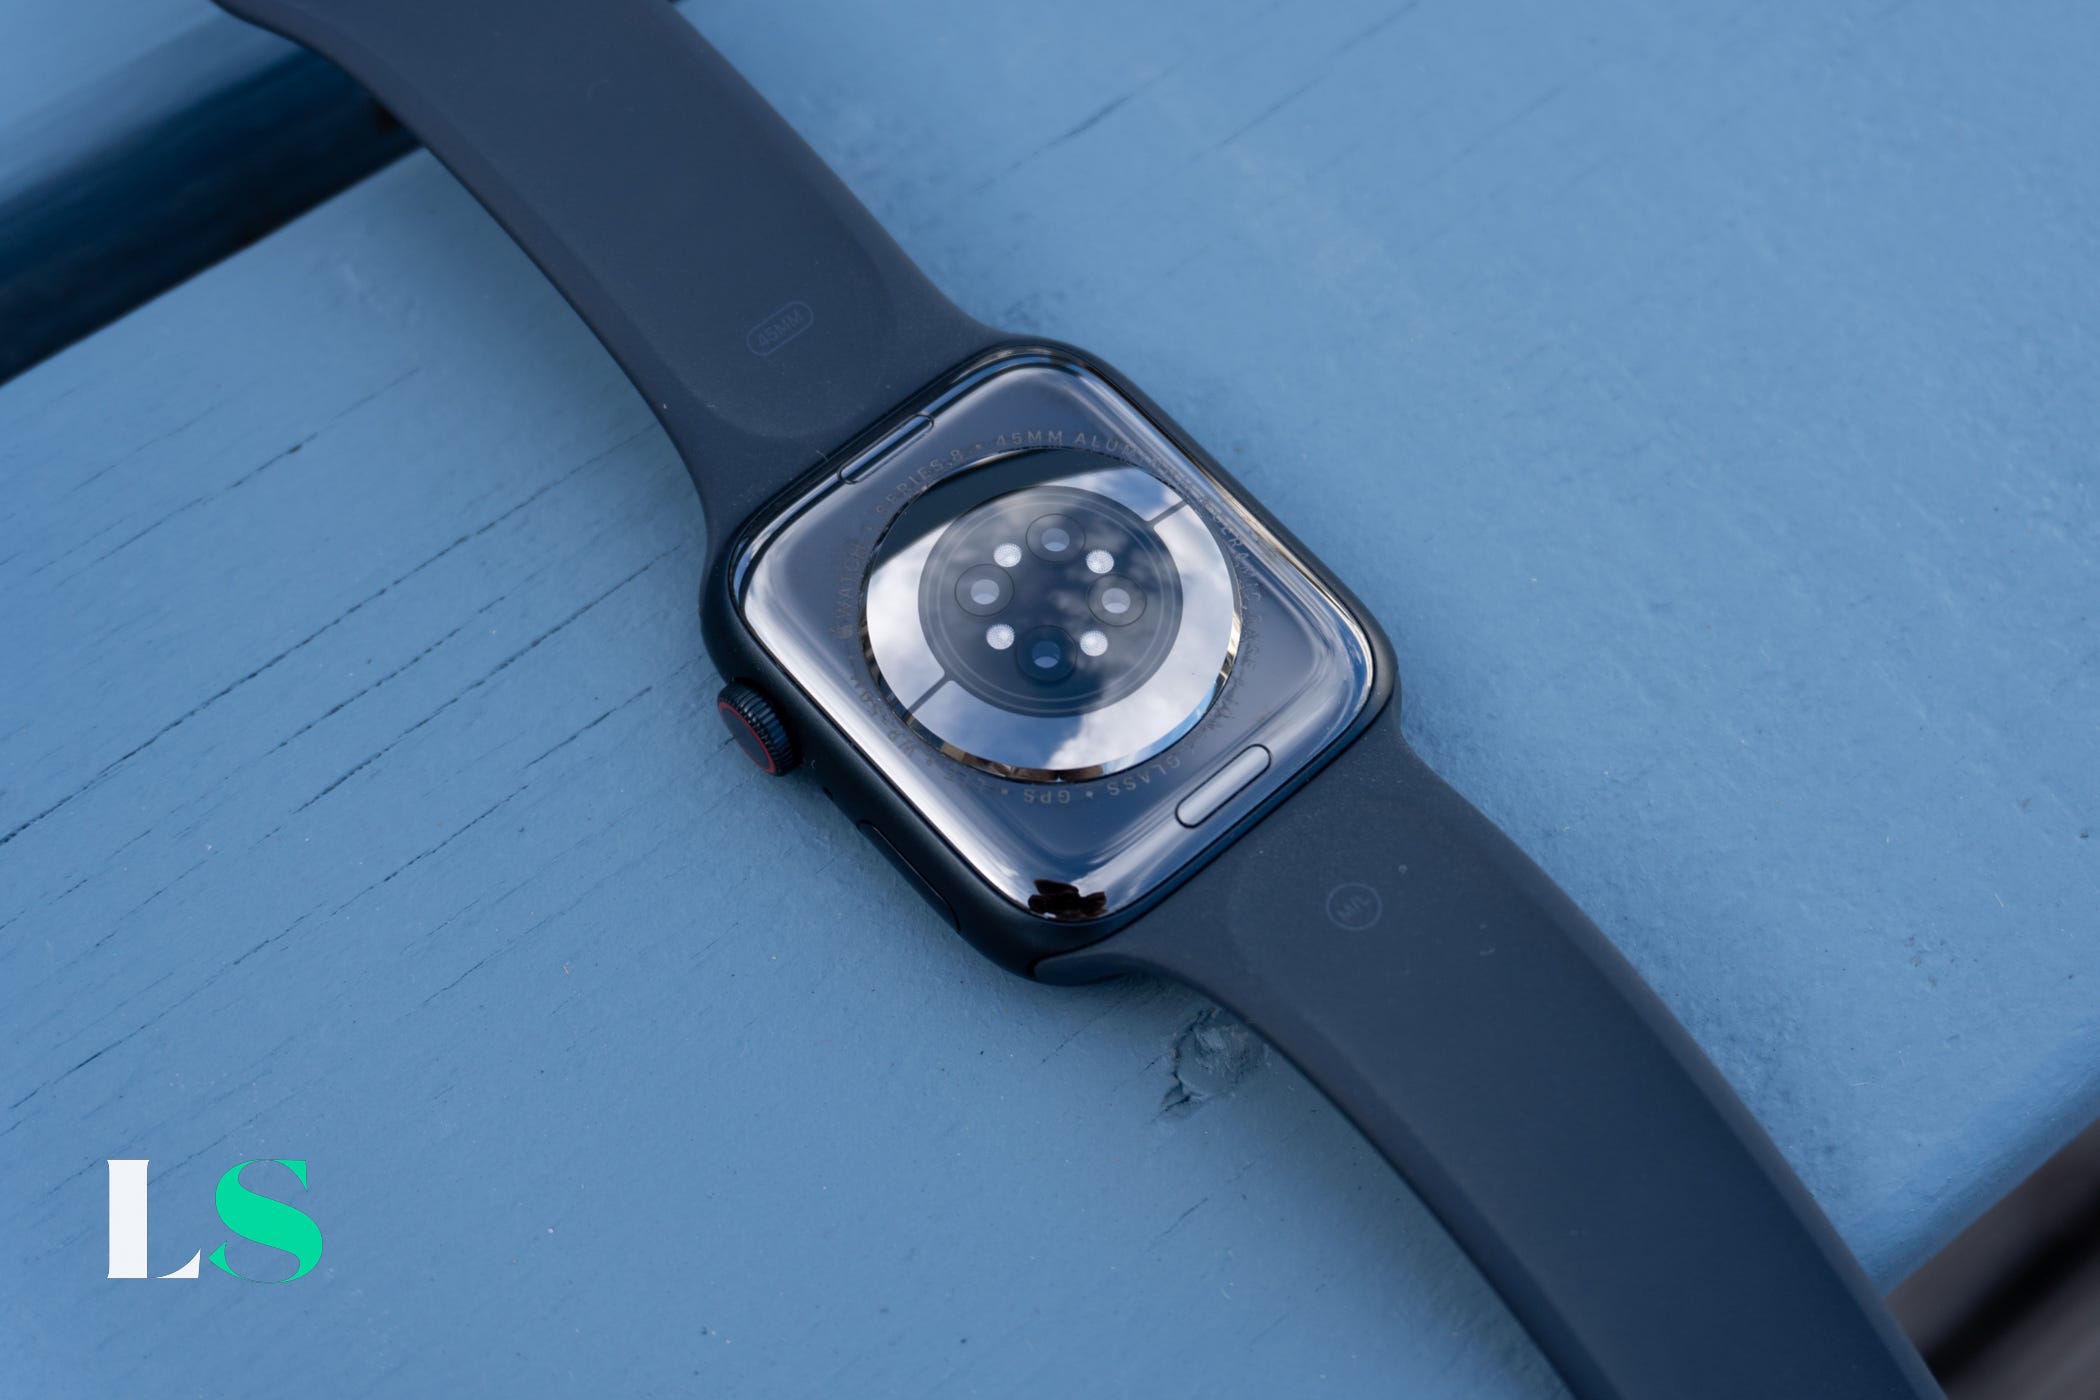 Apple reportedly wants a Watch with more health tracking and could ship one  next year - The Verge